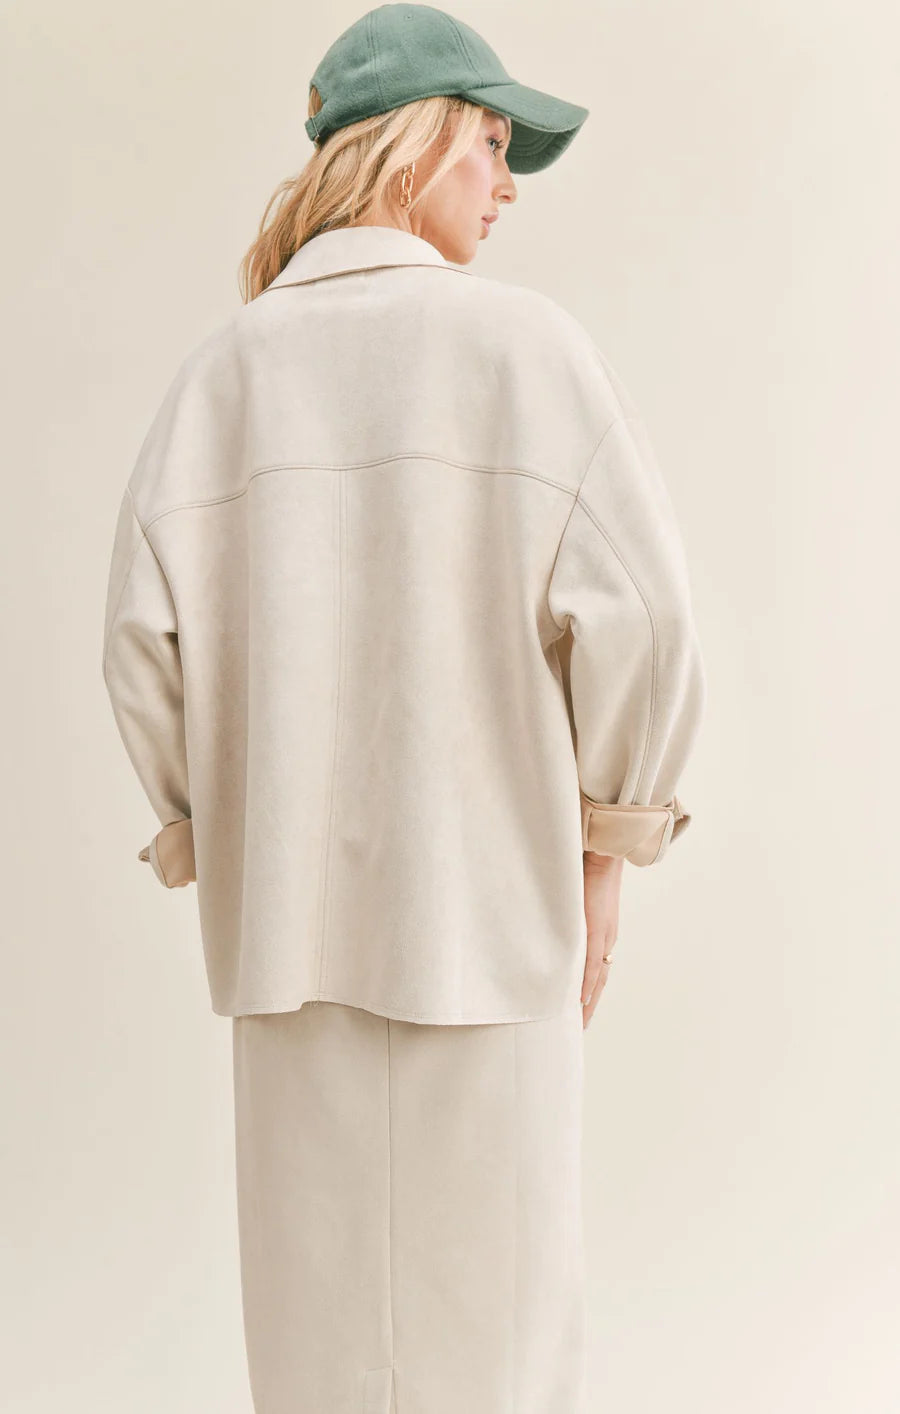 The Gallery Suede Oversized Shirt